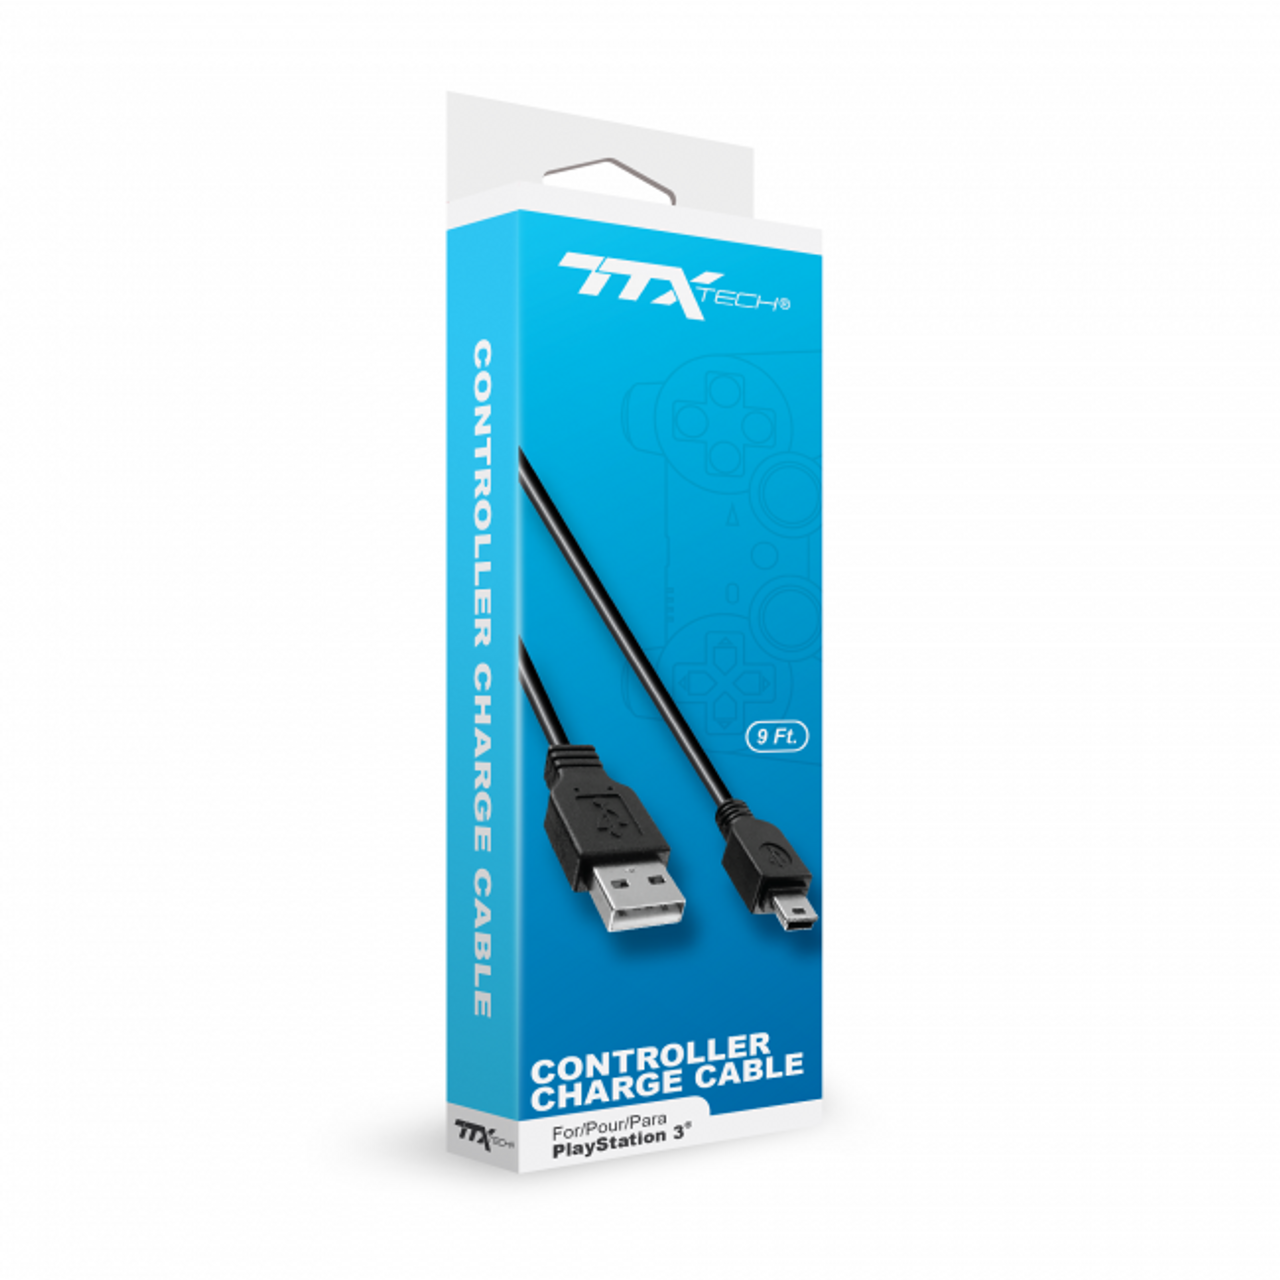 PS3 CHARGE CABLE 9FT (TTX)